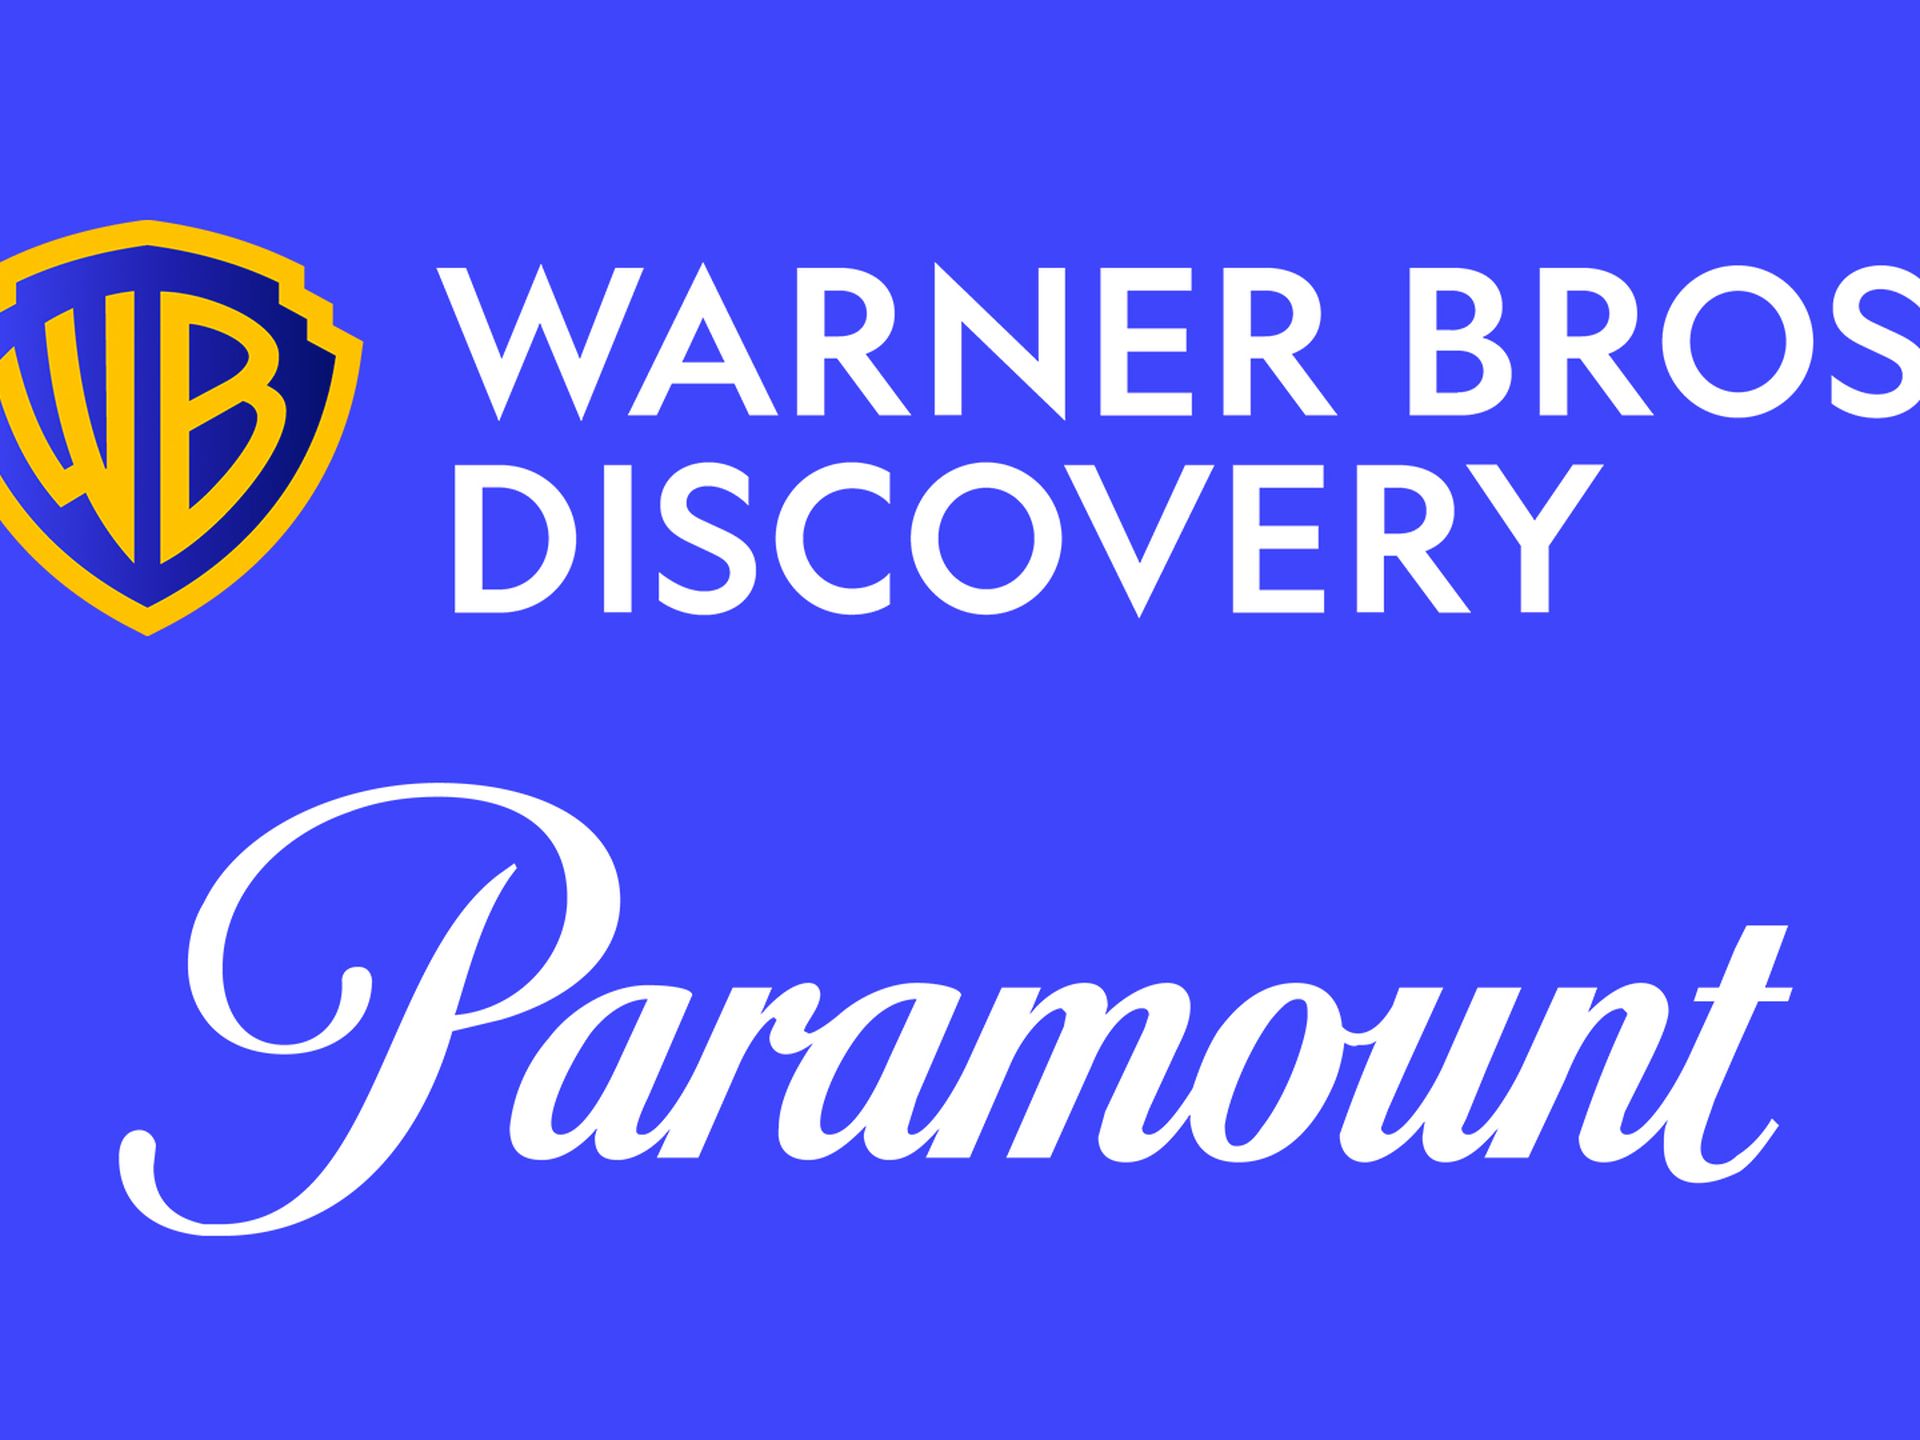 Discovery takes control of HBO, CNN, and Warner Bros., creating